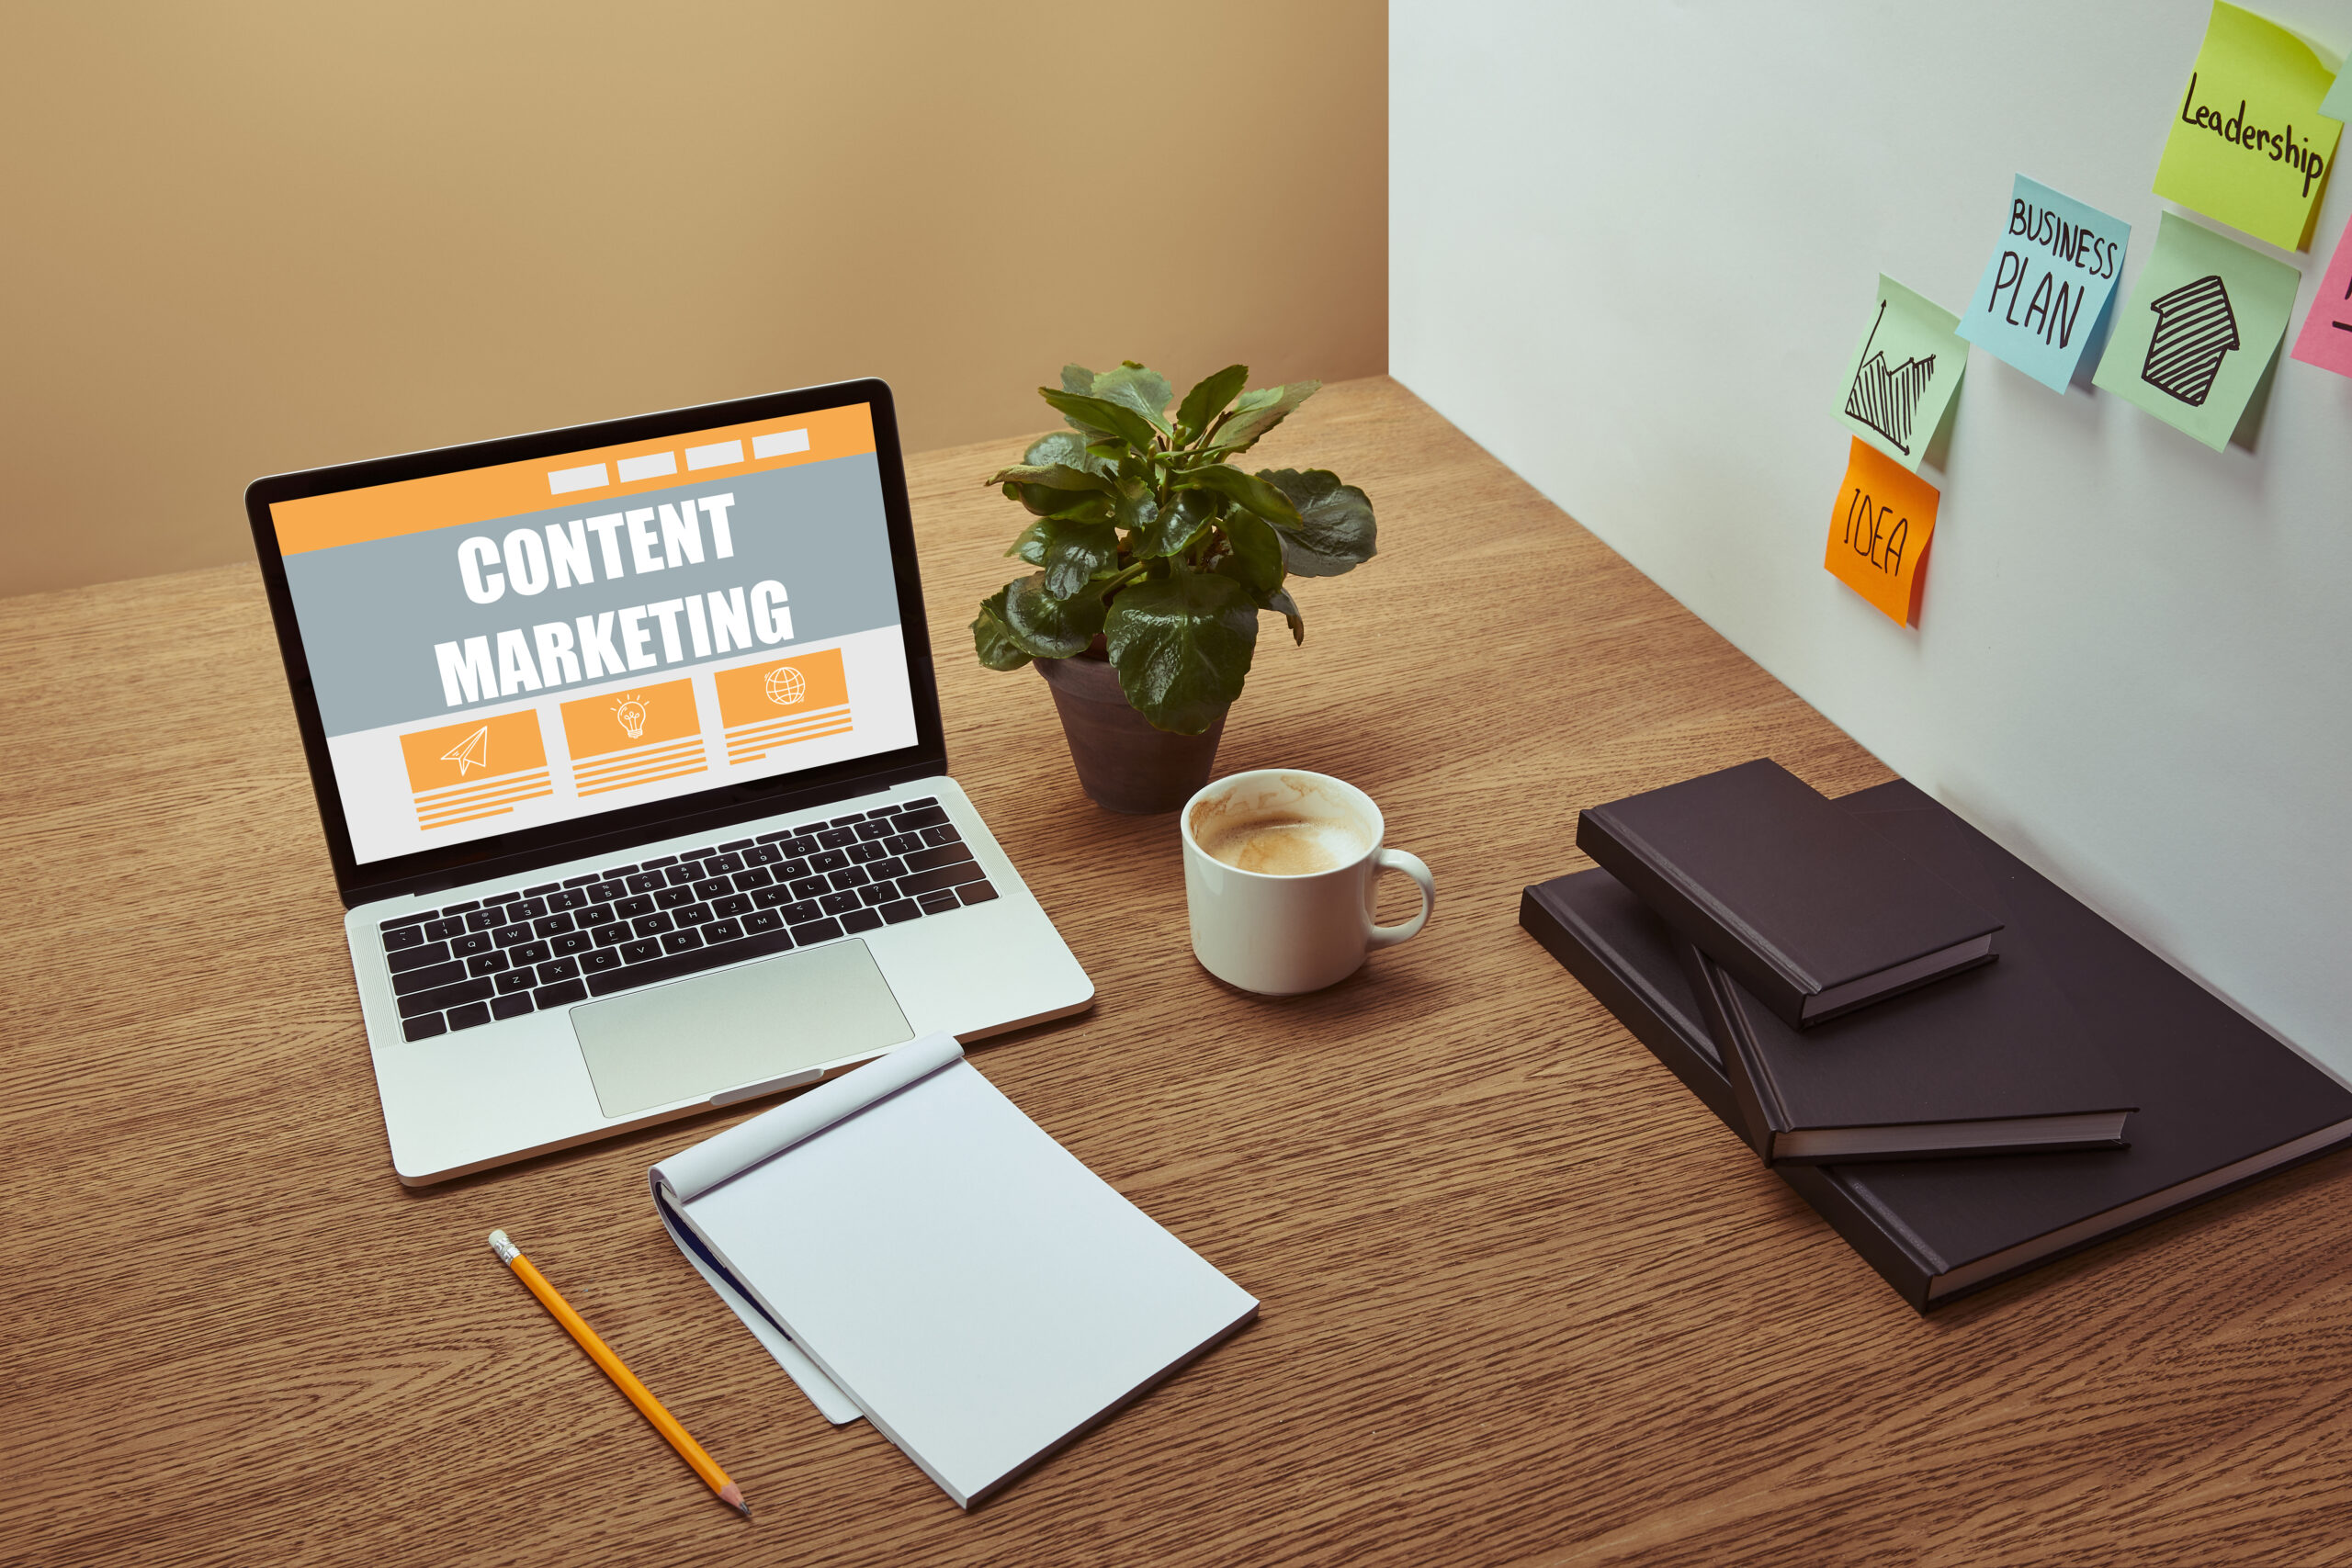 Content Marketing Tips for Small Businesses